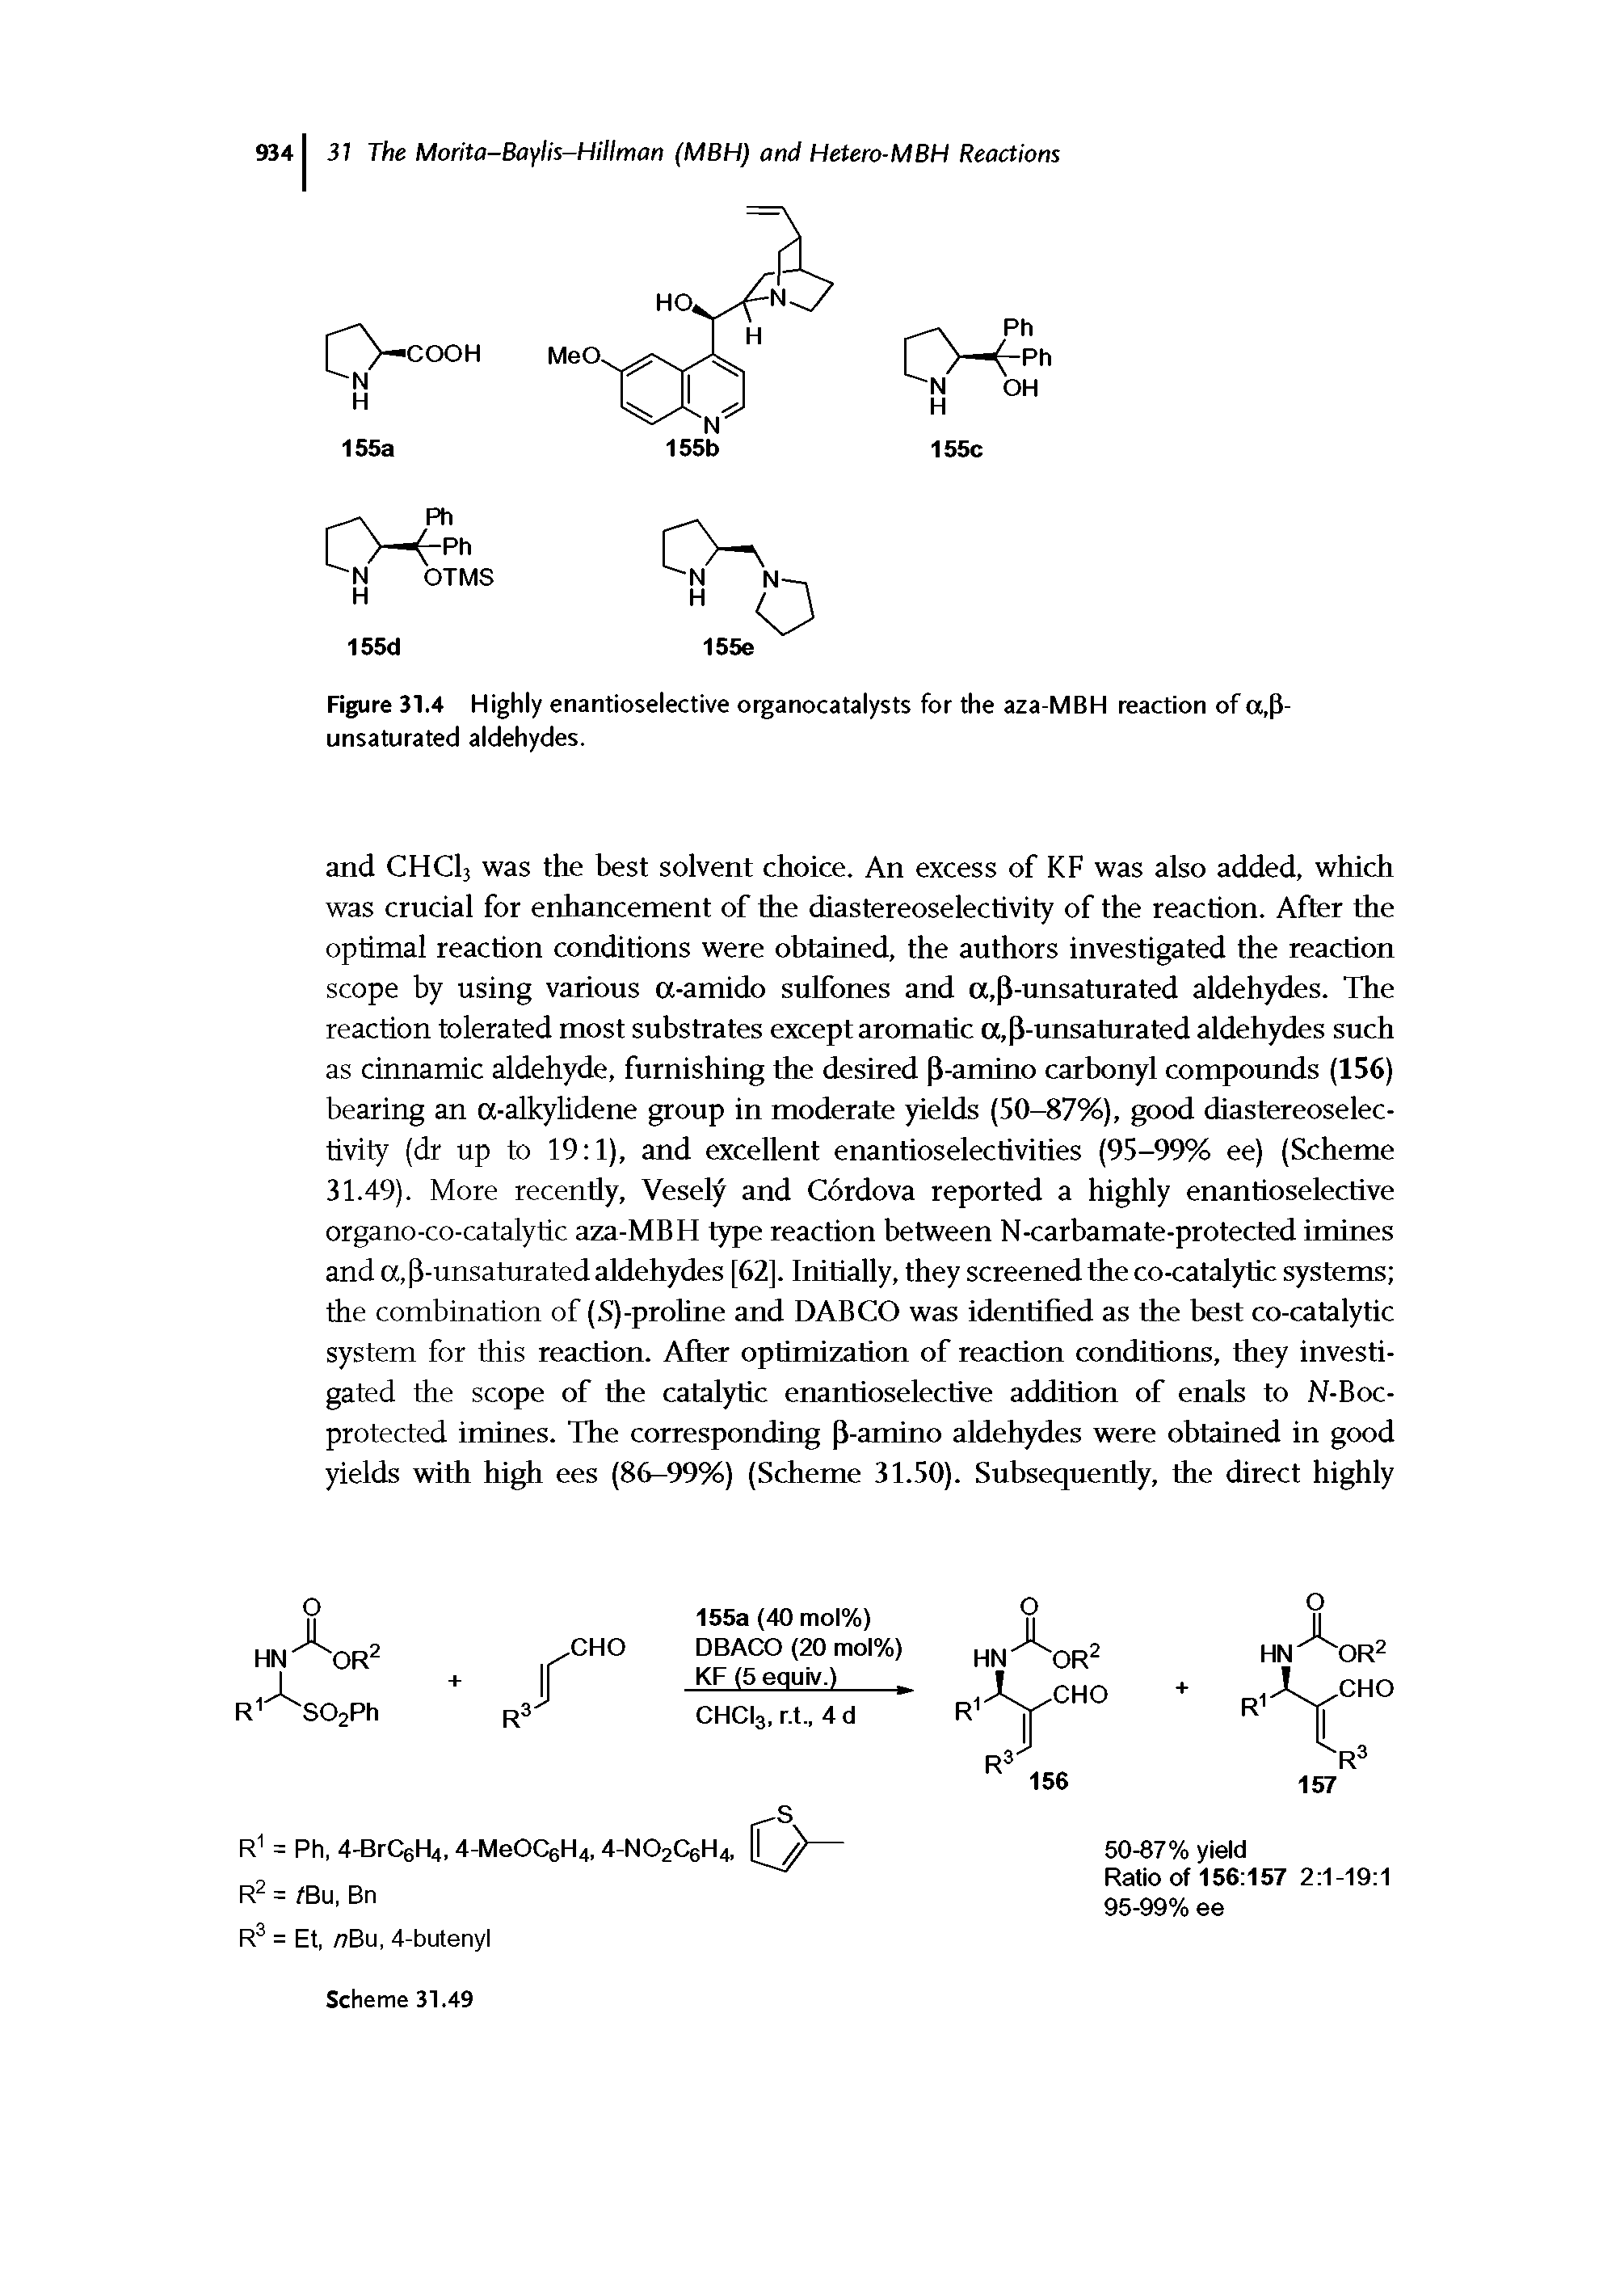 Figure 31.4 Highly enantioselective organocatalysts for the aza-MBH reaction of a,[ unsaturated aldehydes.